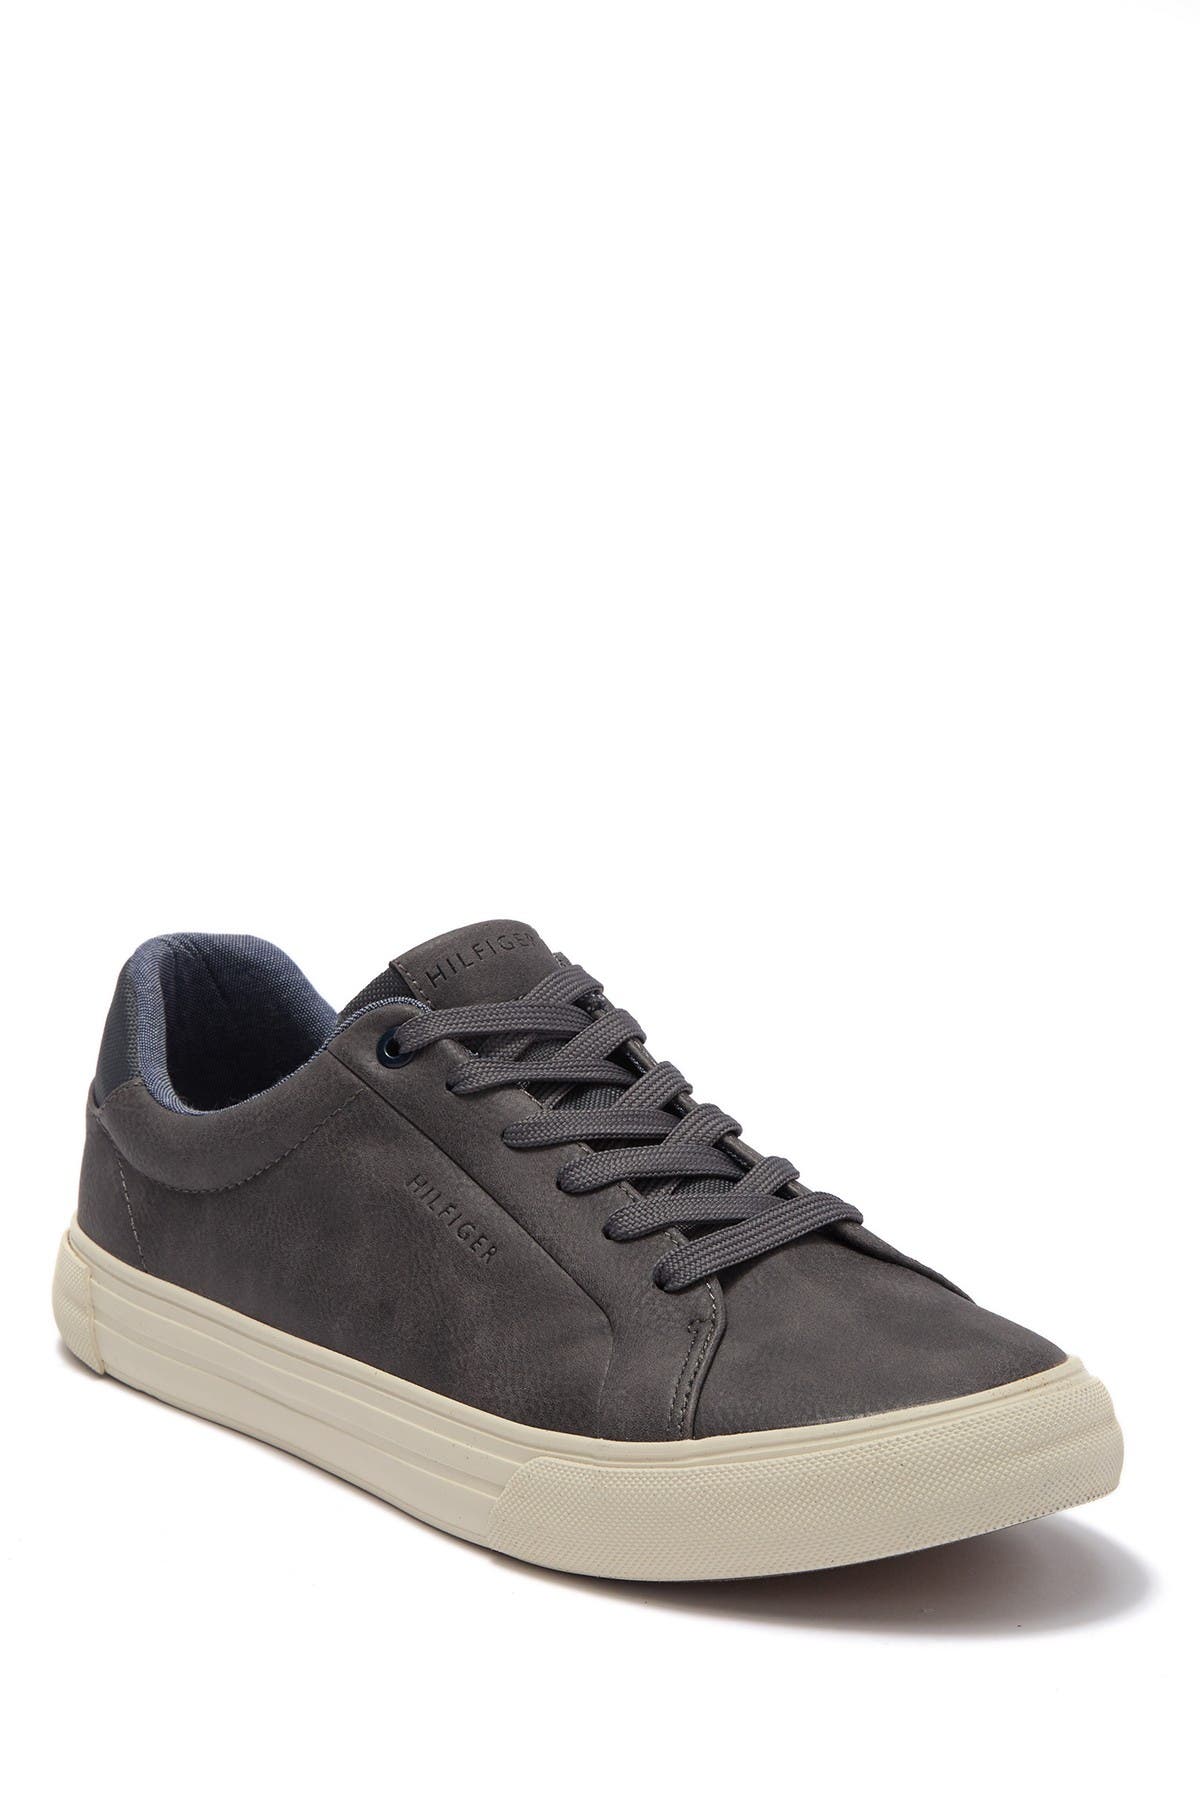 Tommy Hilfiger | Rance Leather Sneaker 